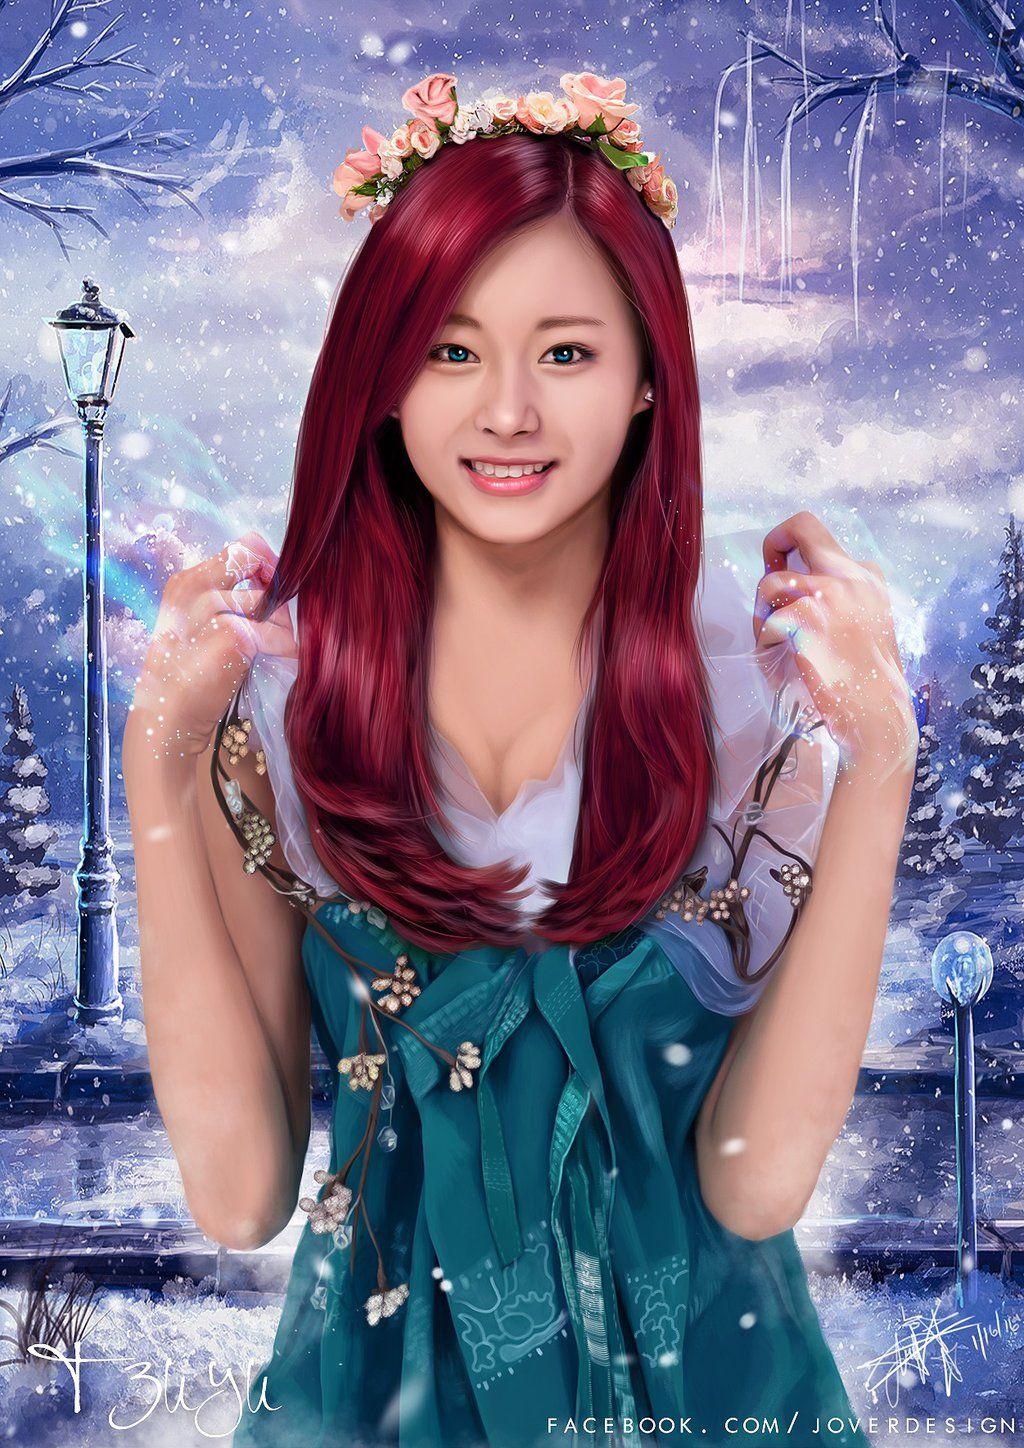 Twice Tzuyu Wallpapers Wallpaper Cave